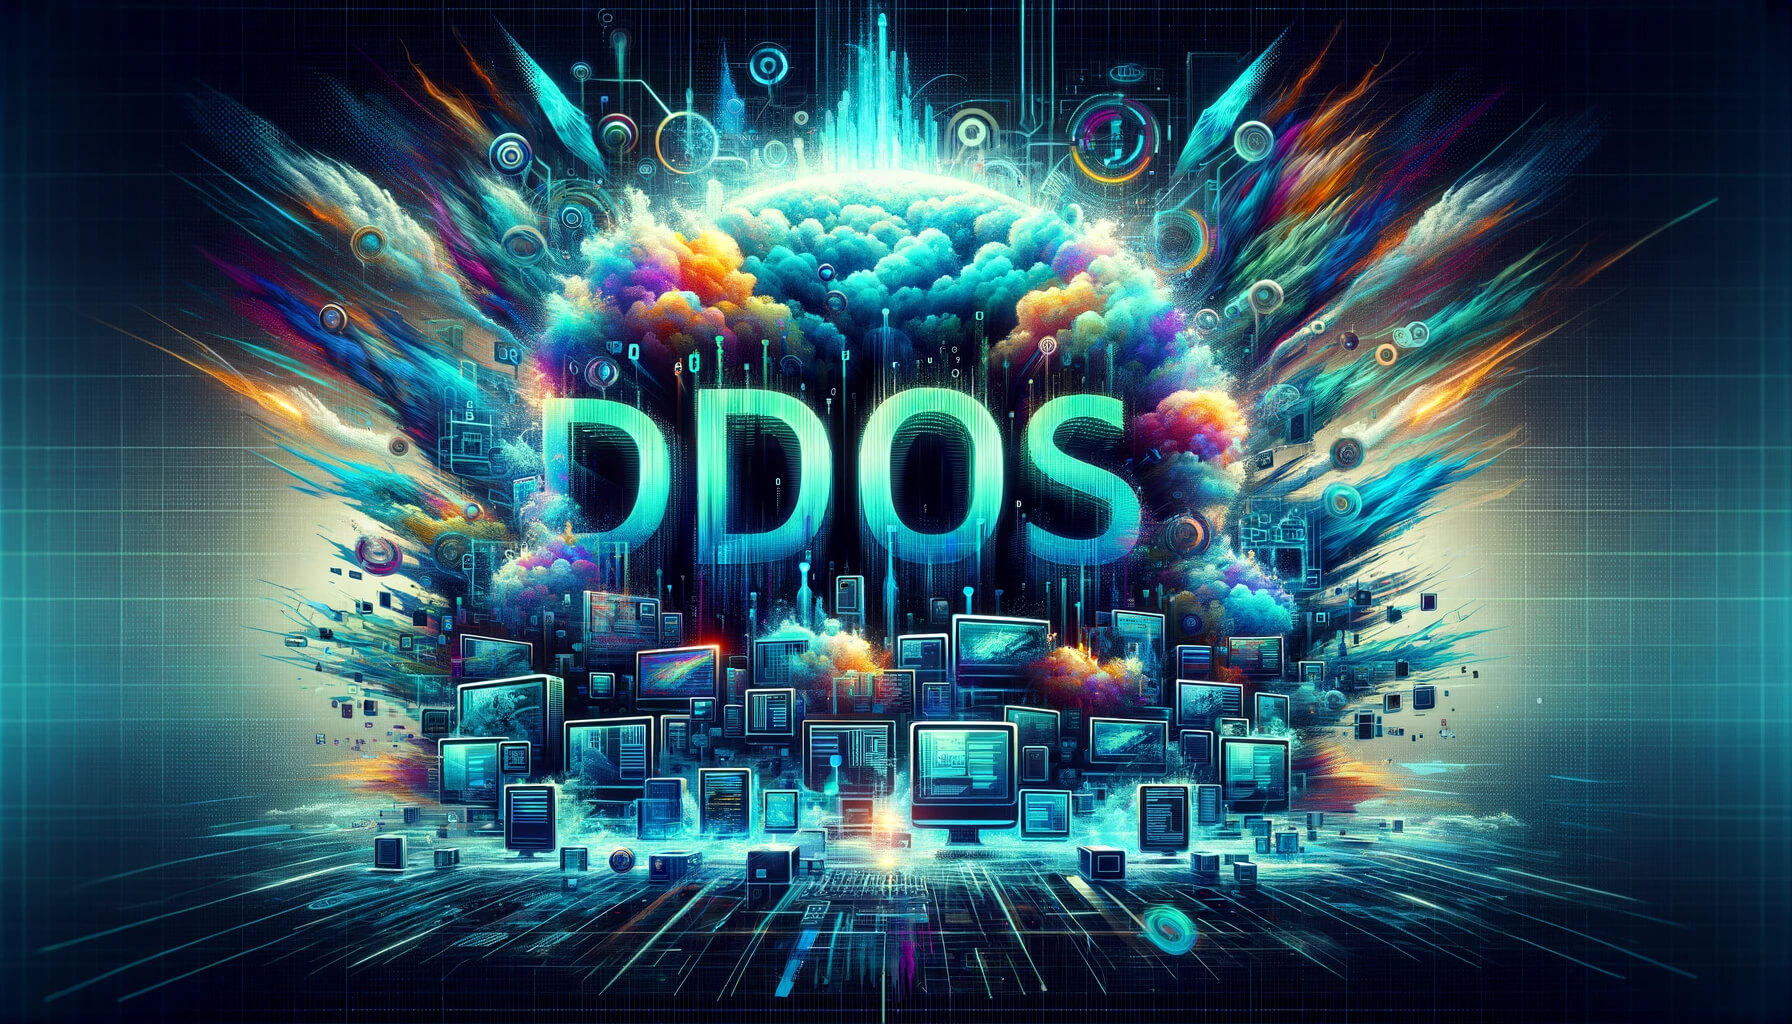 Distributed denial of service DDoS attacks